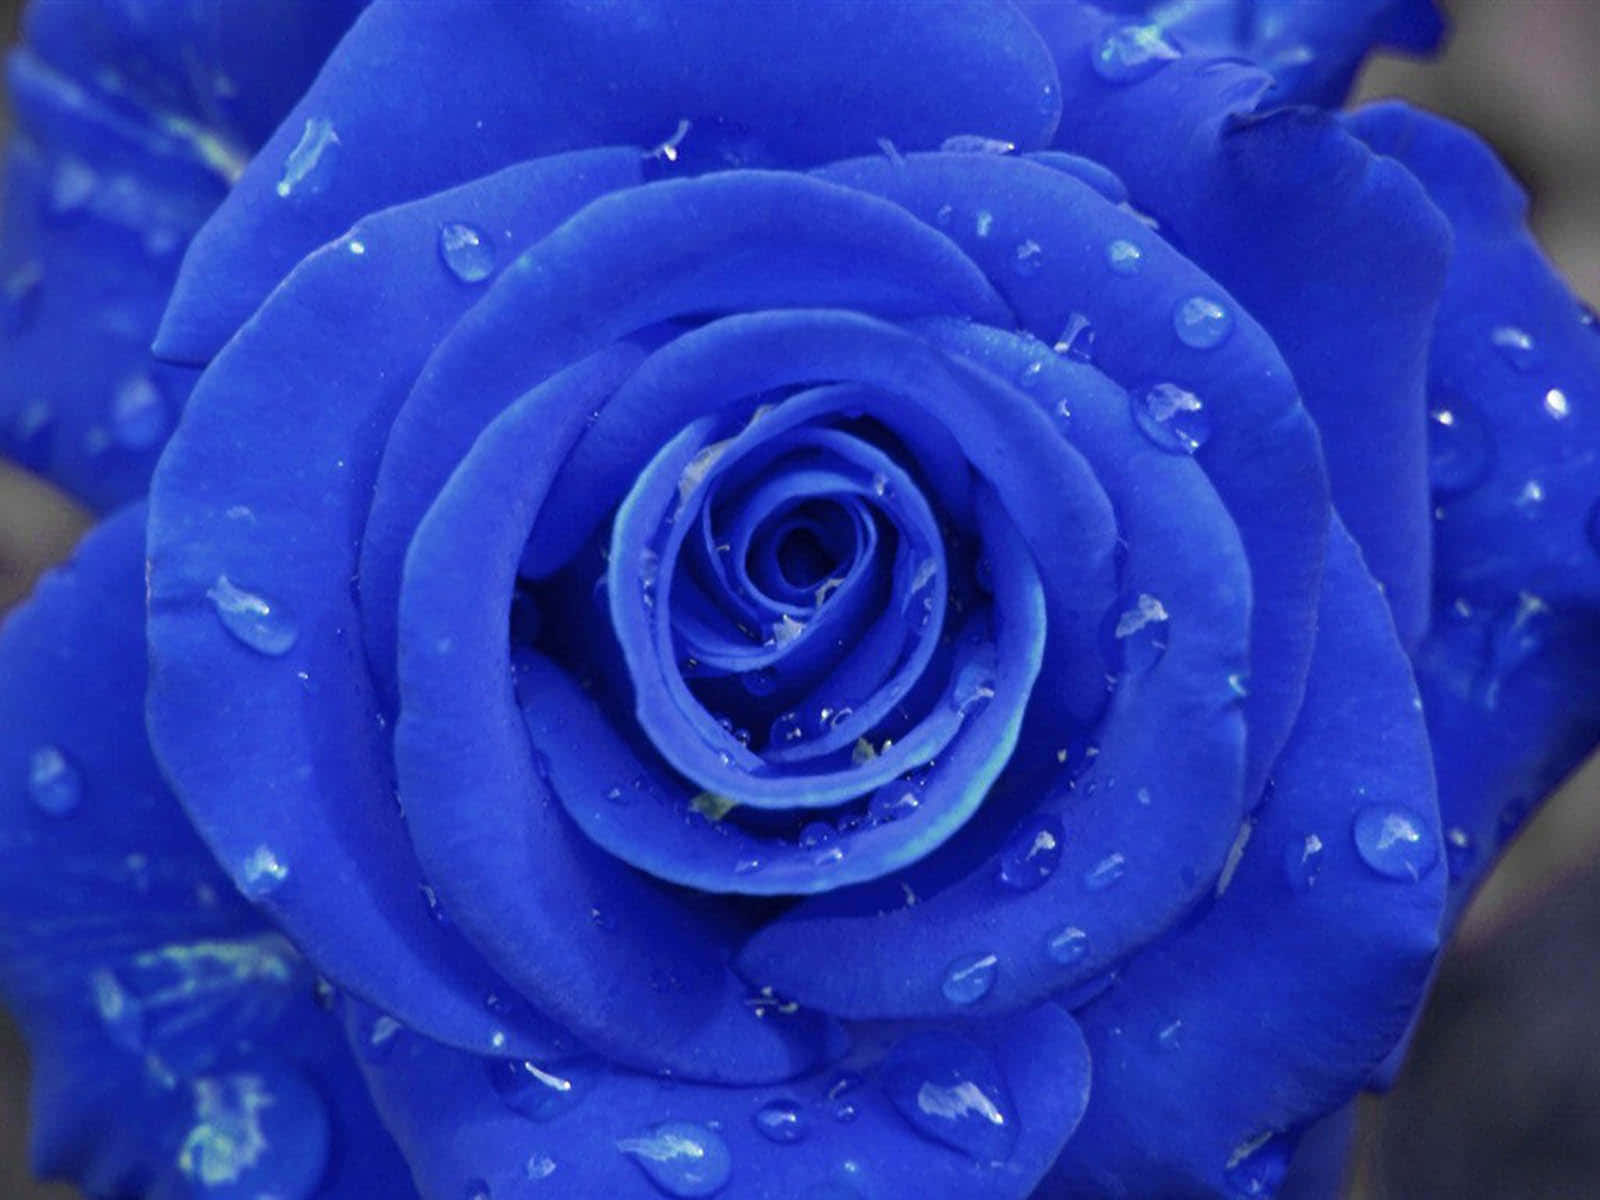 A Blue Rose With Water Droplets On It Background